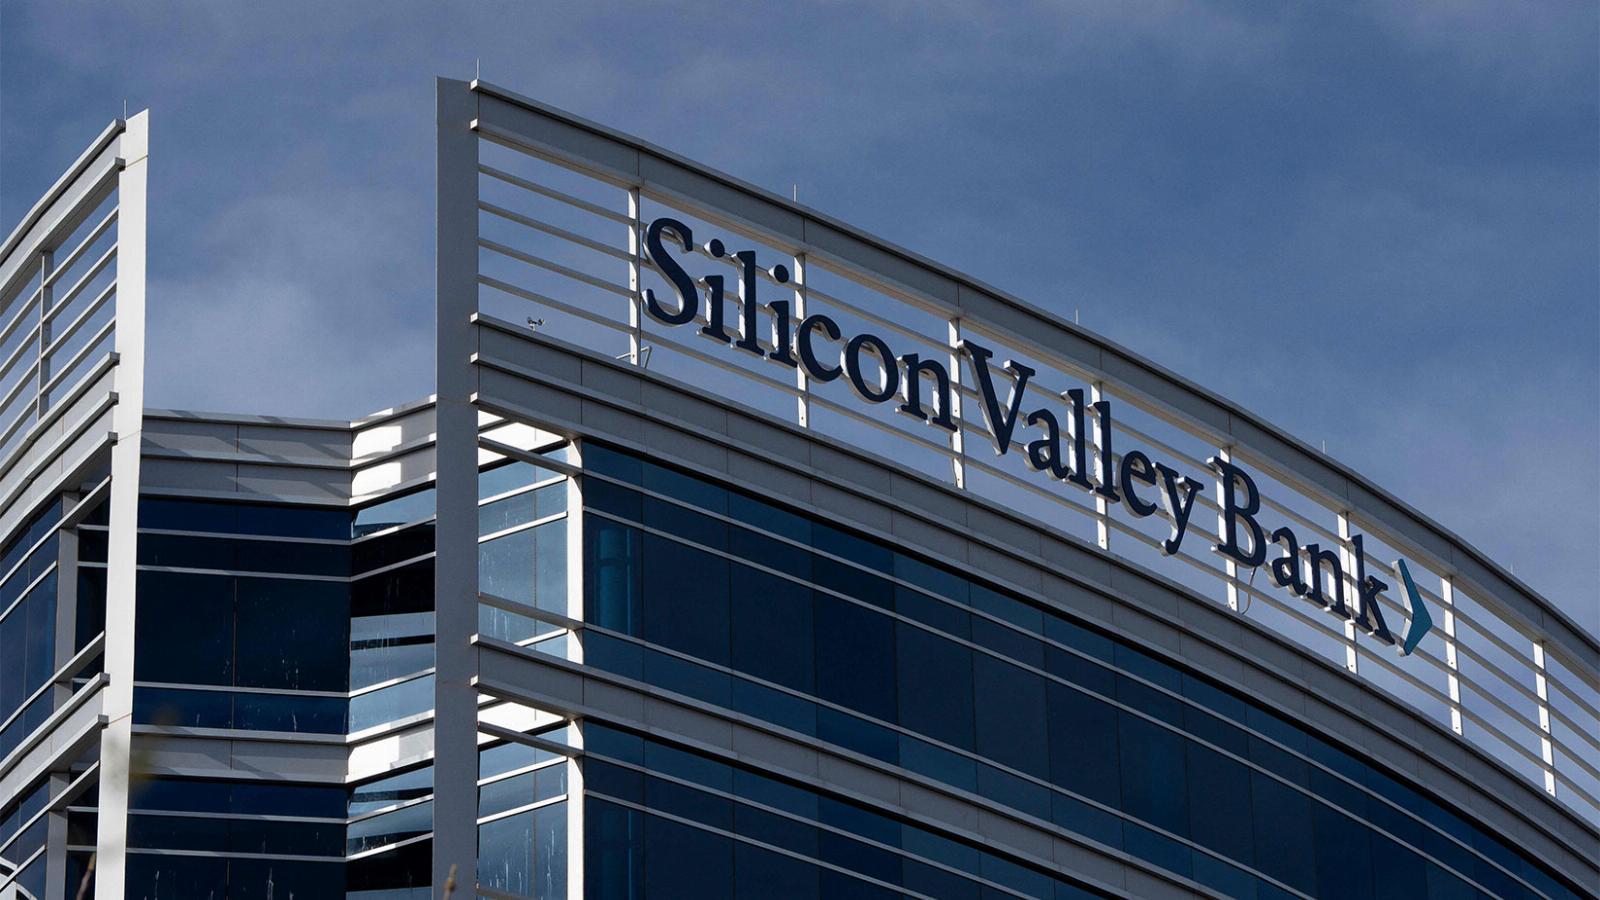 Silicon Valley Bank’s chief risk officer is out, months after taking the job